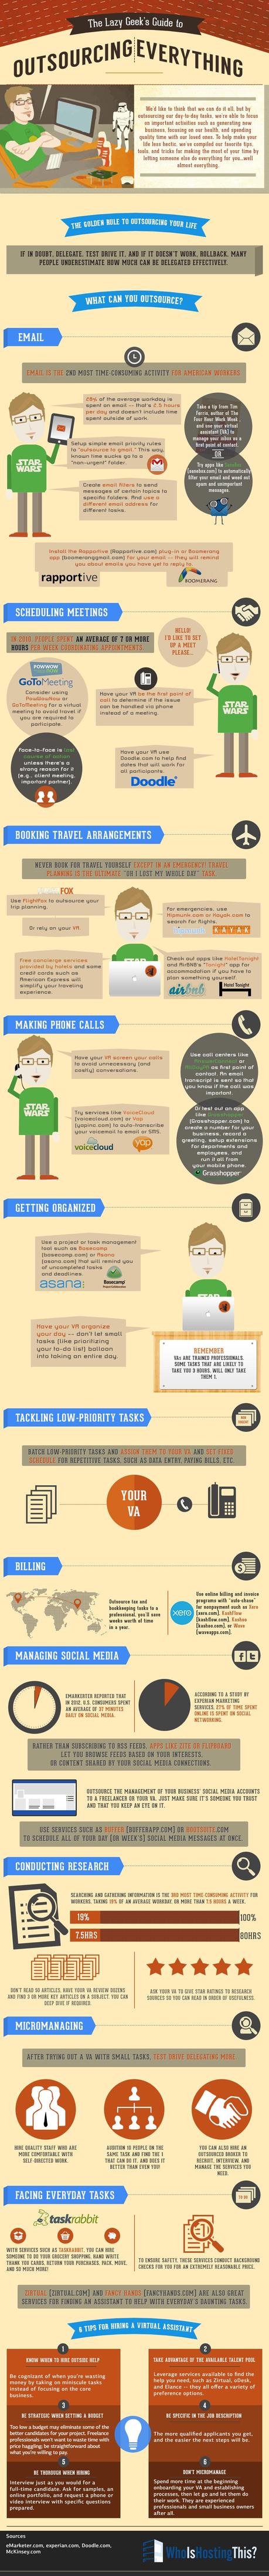 The Lazy Geek’s Guide to Outsourcing Everything [Infographic] by Who Is Hosting This: The Blog